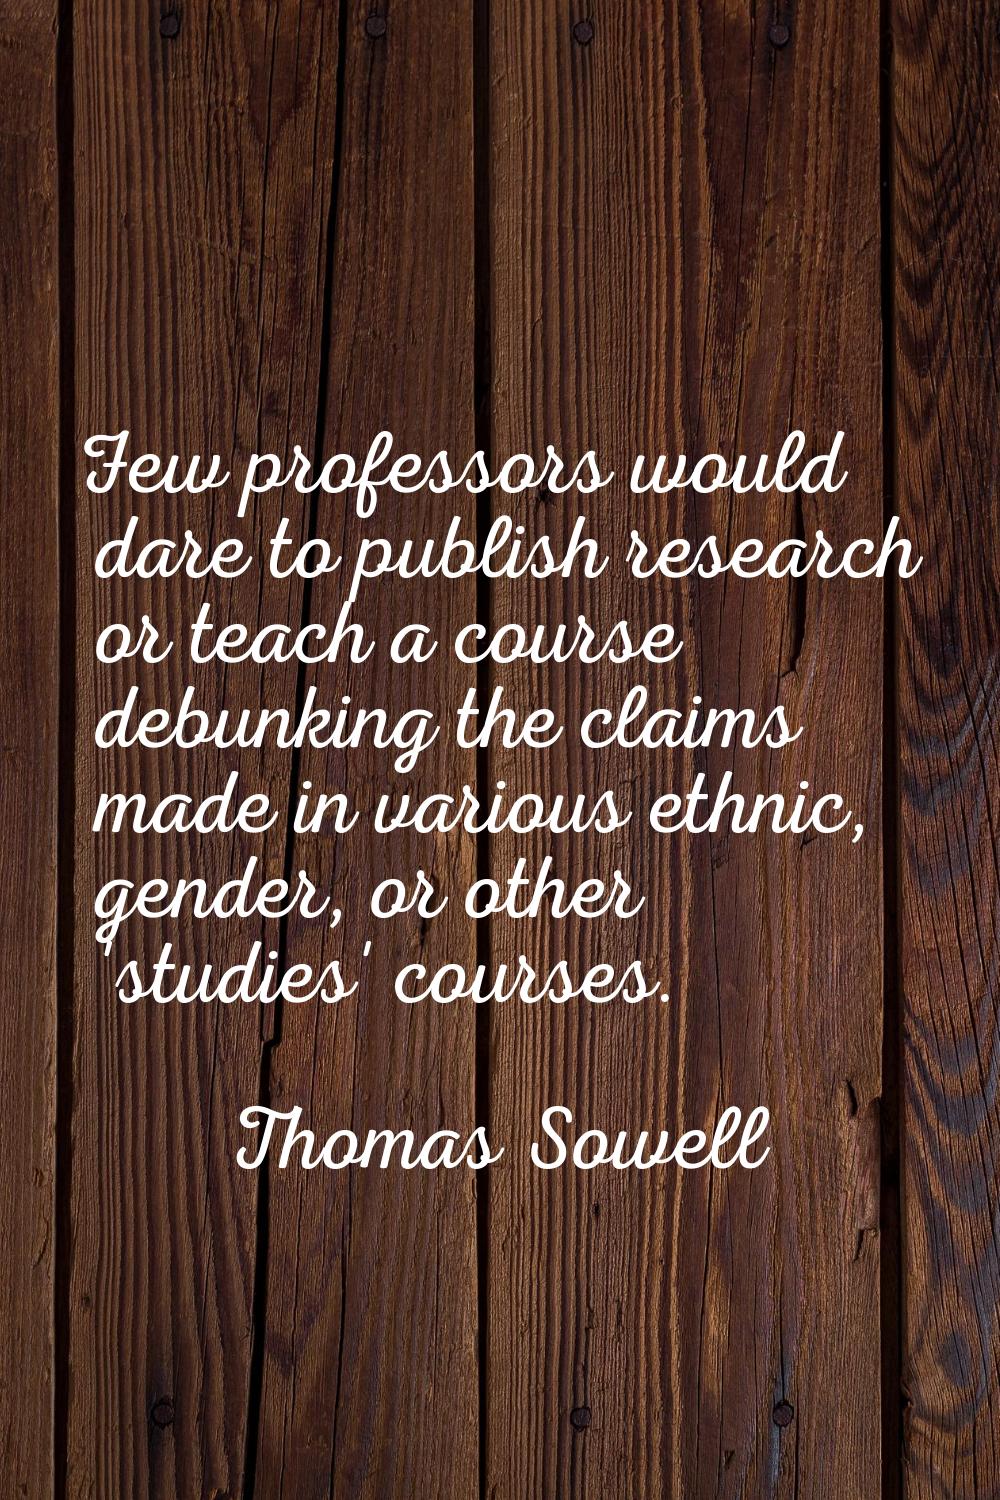 Few professors would dare to publish research or teach a course debunking the claims made in variou